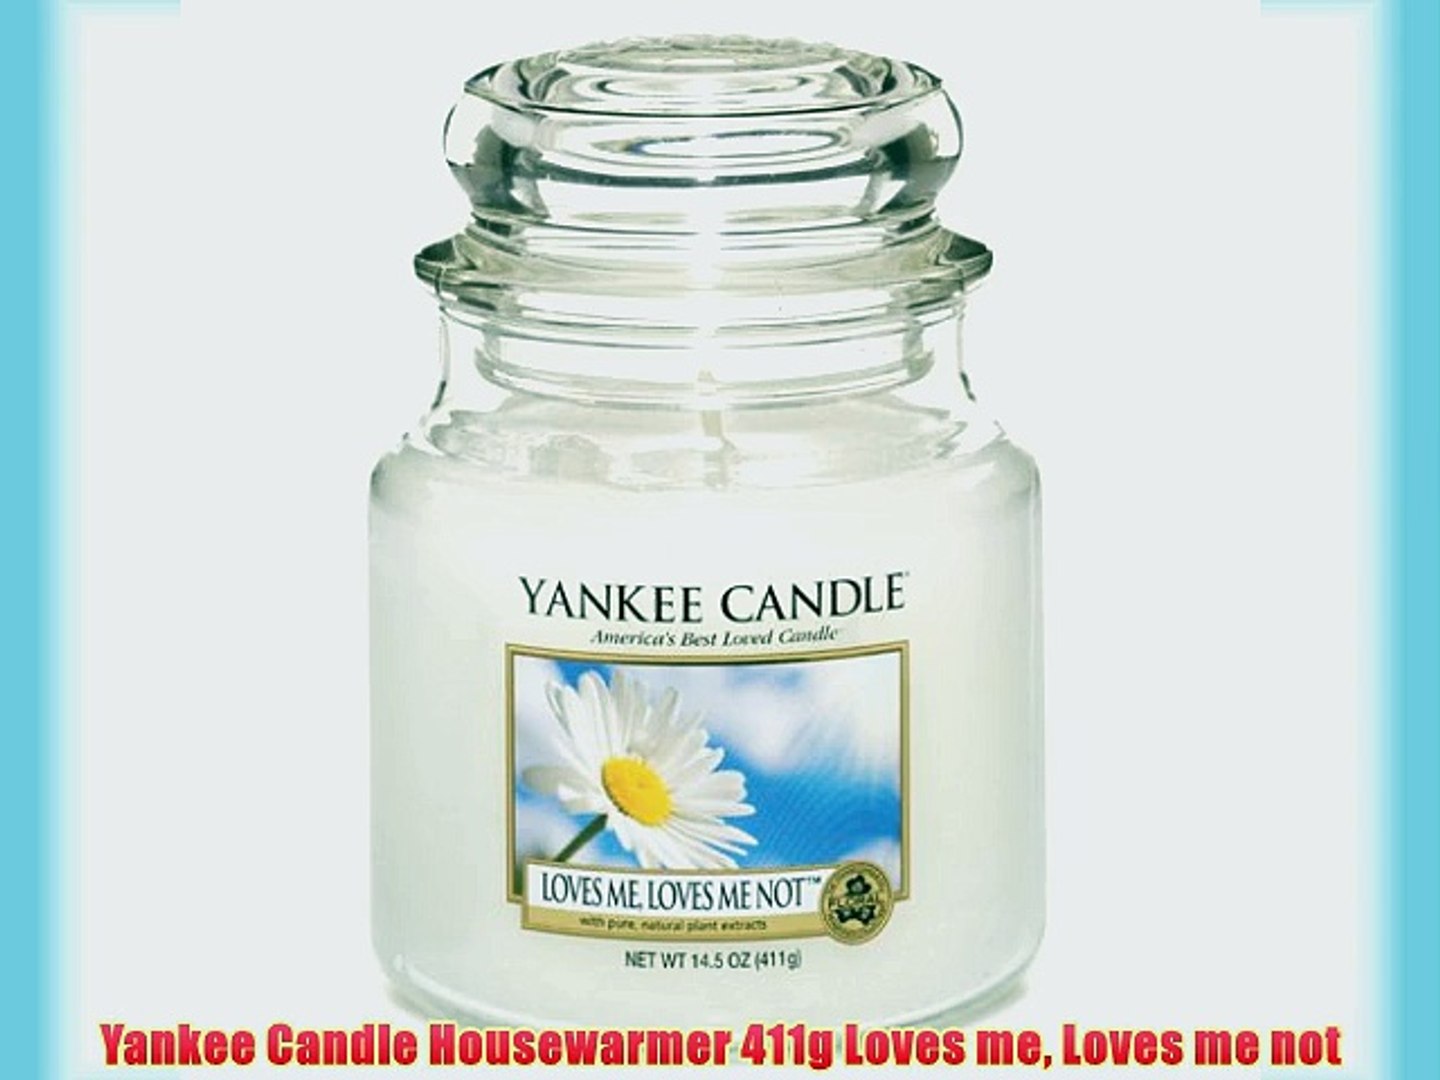 Yankee Candle Housewarmer 411g Loves me Loves me not - video dailymotion